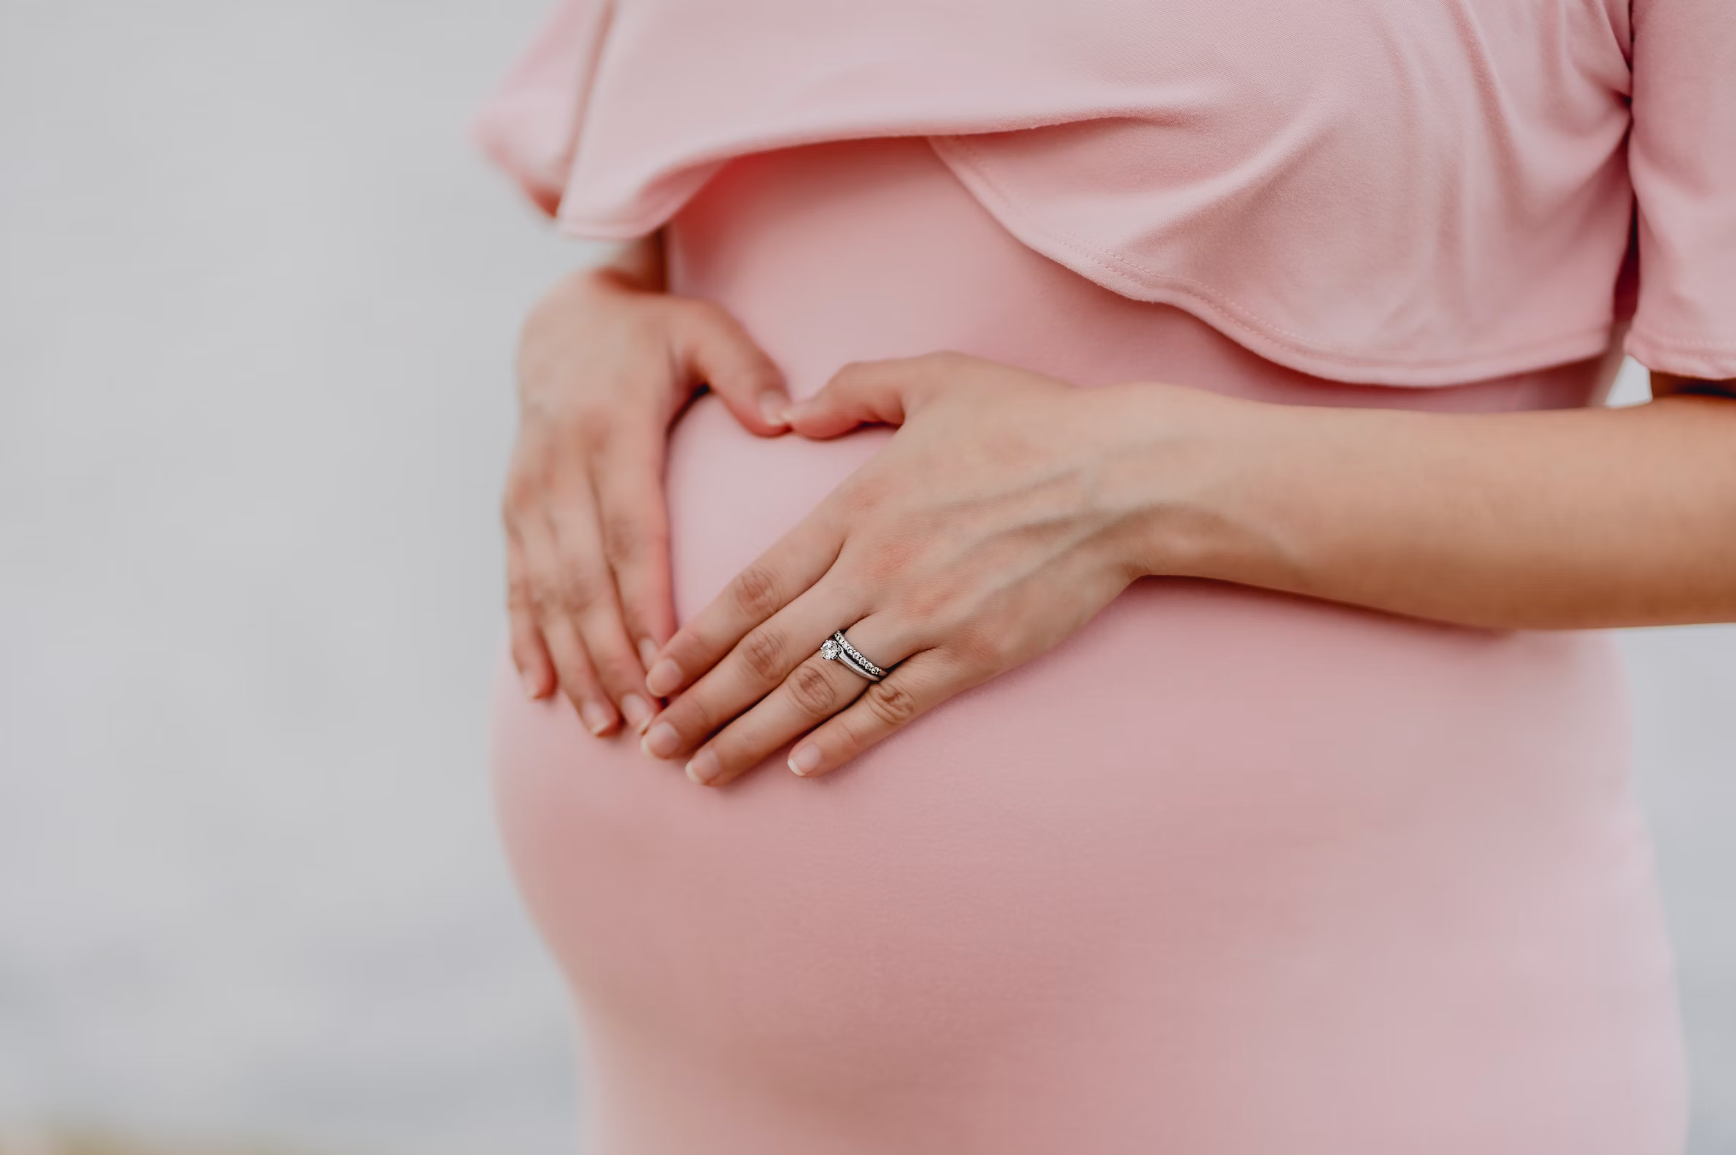 Maternal Height, Pre-Pregnancy BMI, Weight Gain Affect Adverse Pregnancy Events